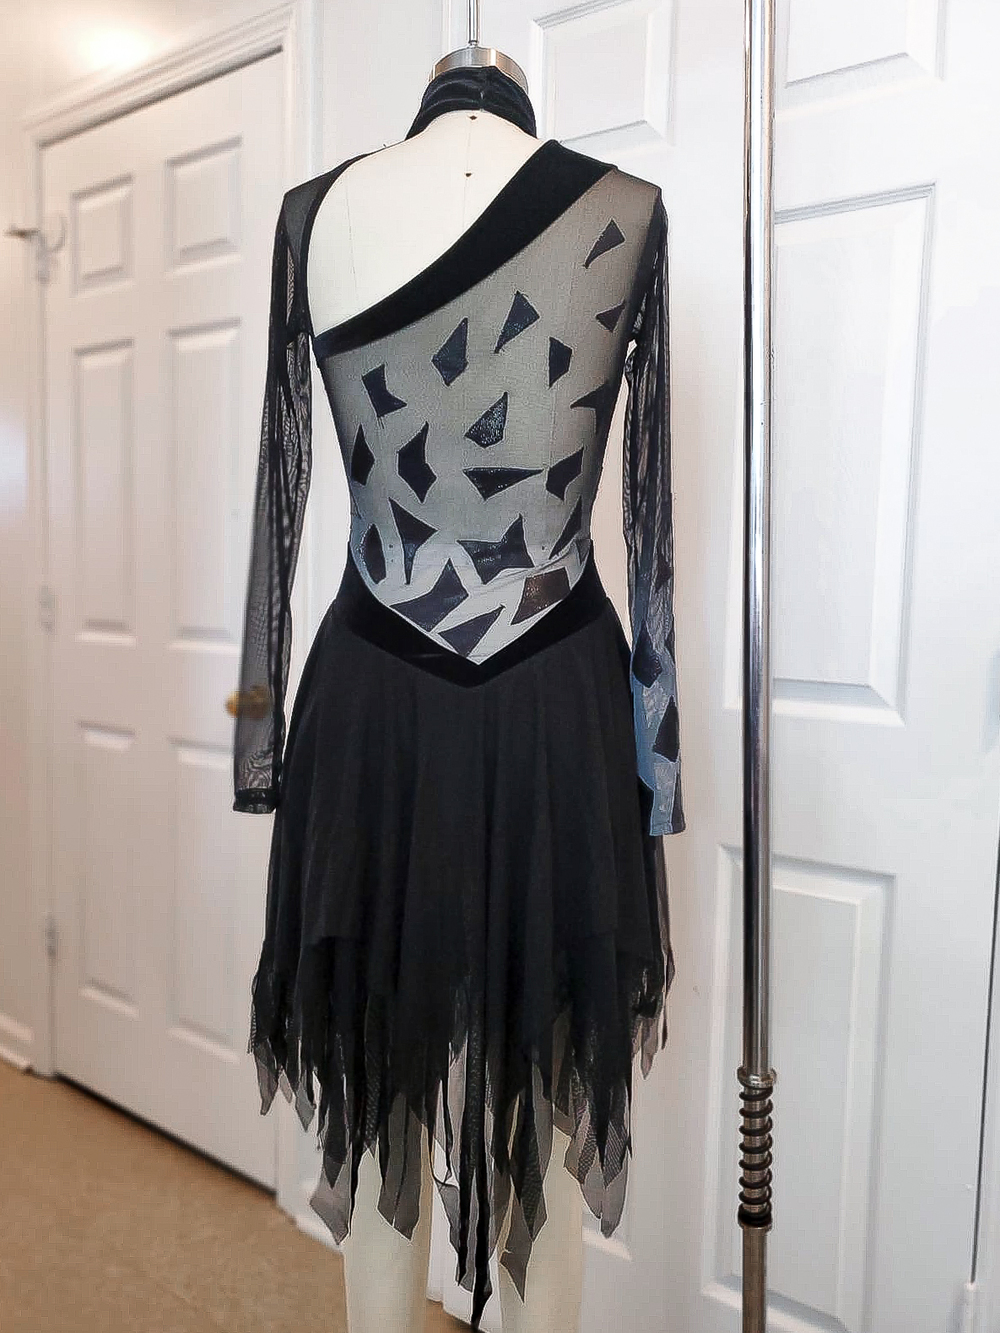 Photo Dance Costumes: Custom and Alterations